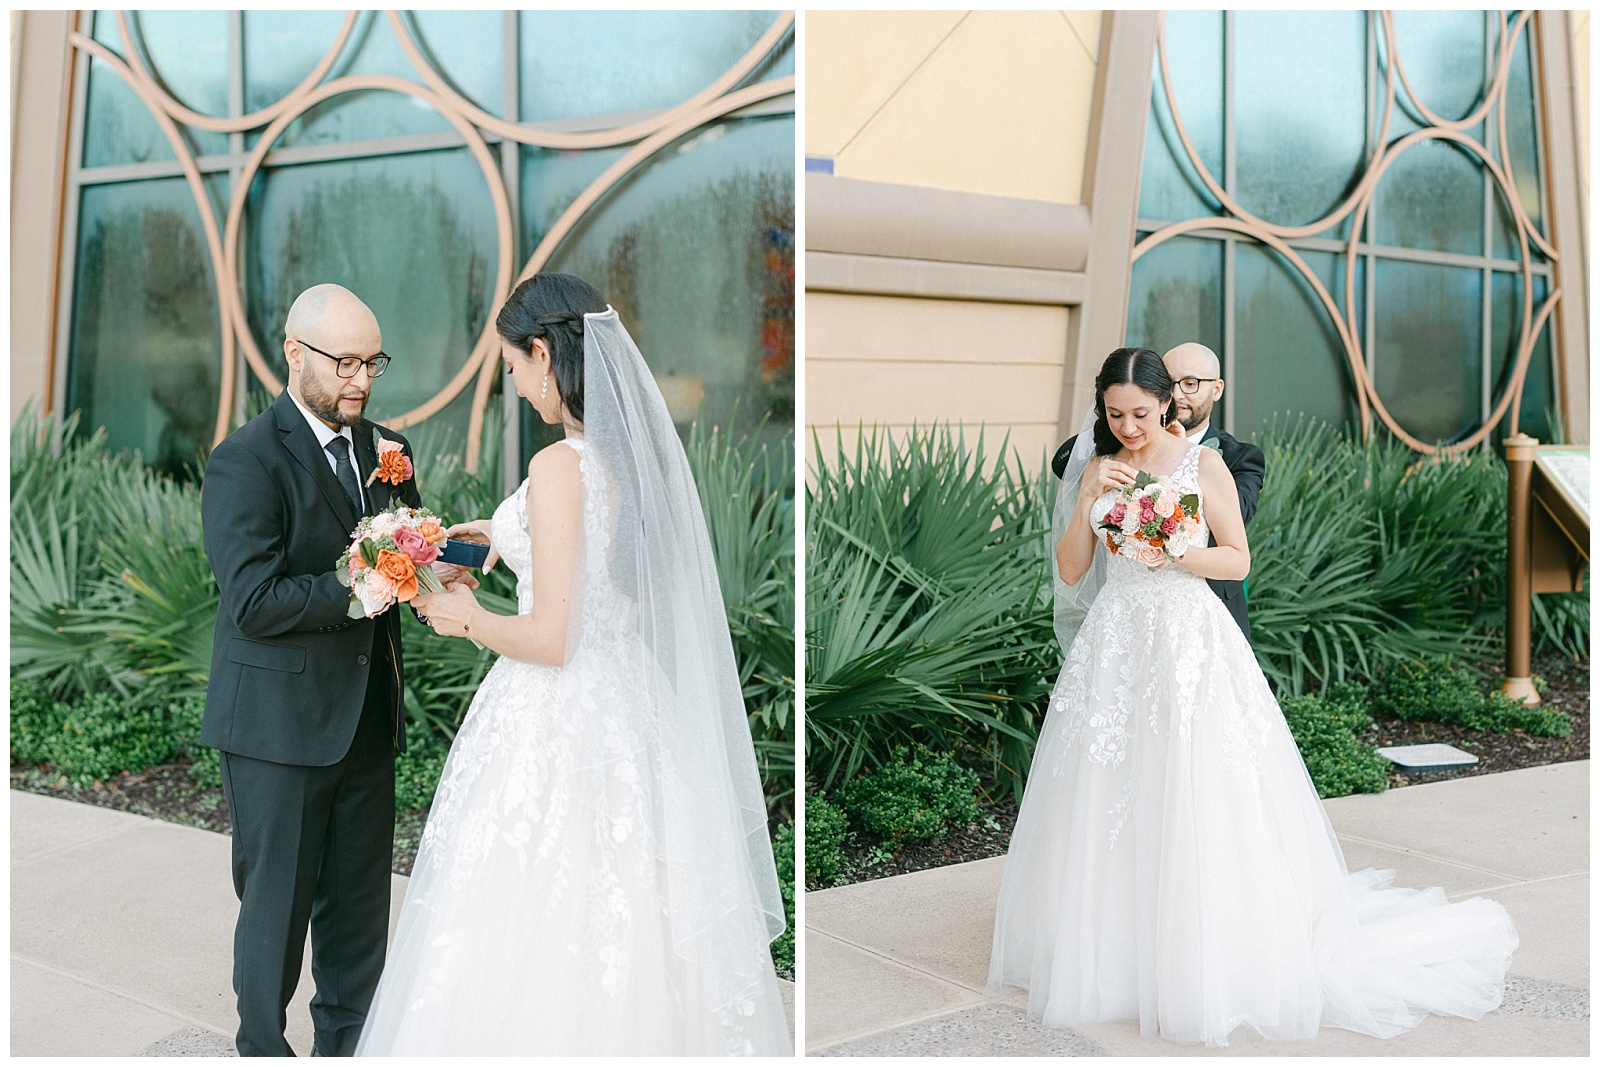 Left: Groom surprises bride with wedding gift during their first look.
Right: Groom helps bride put on wedding day necklace. By Elizabeth Kane Photography at Disney's Riviera Resort in Orlando Florida